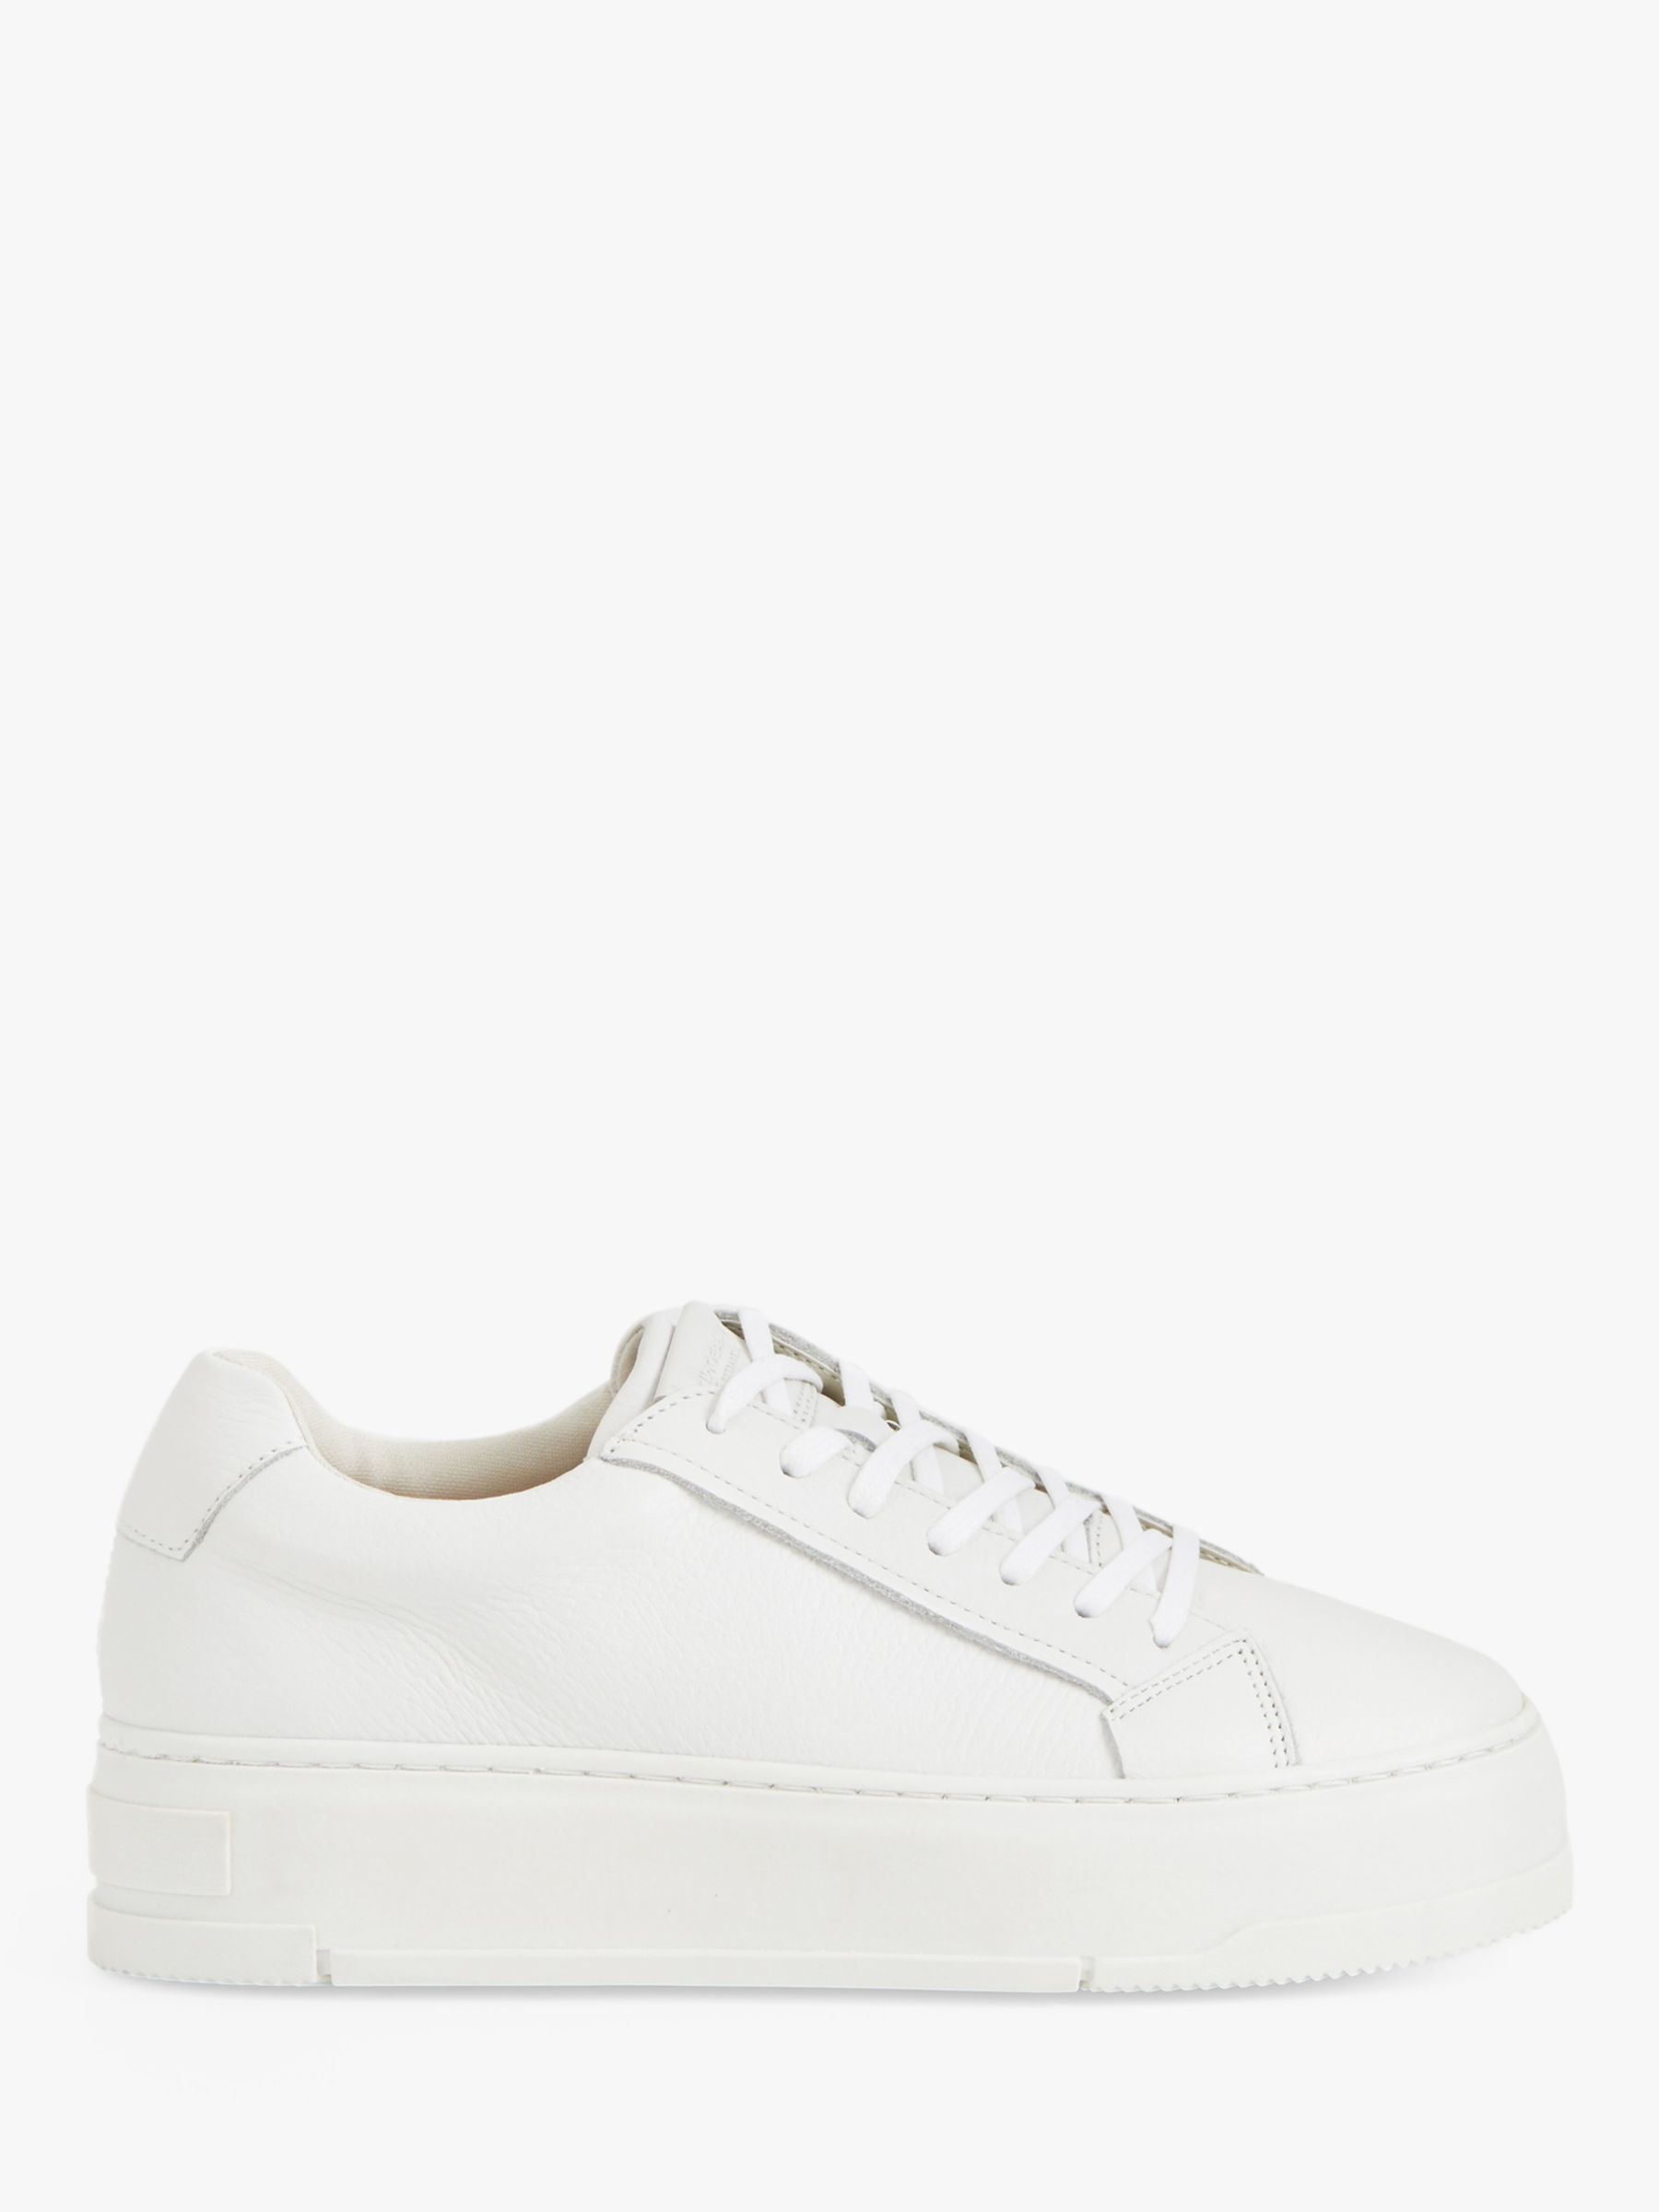 Vagabond Shoemakers Judy Leather Trainers, White at John Lewis & Partners